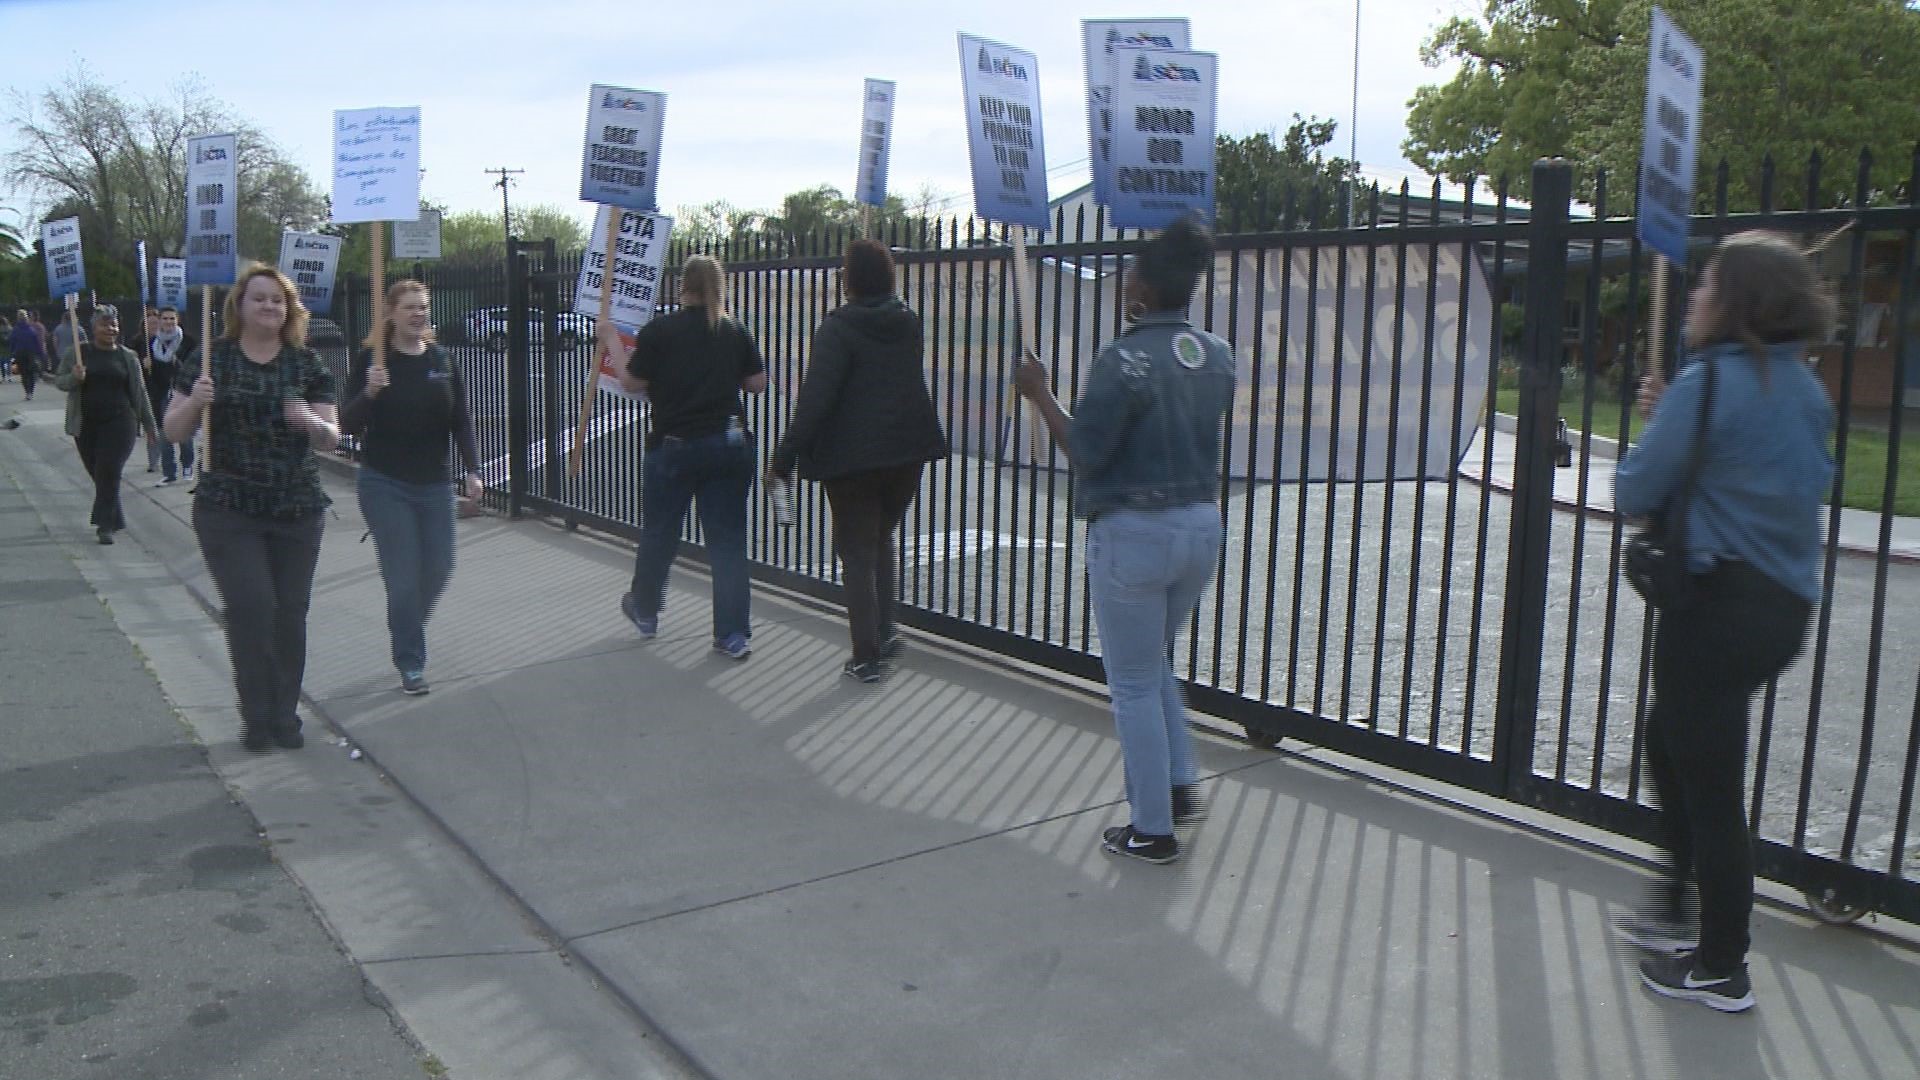 Hundreds of teachers around Sacramento were out of their classrooms Thursday striking and making their voices heard. Their goal was to put pressure on the Sacramento City Unified School District (SCUSD) as it's under threat of a state takeover.